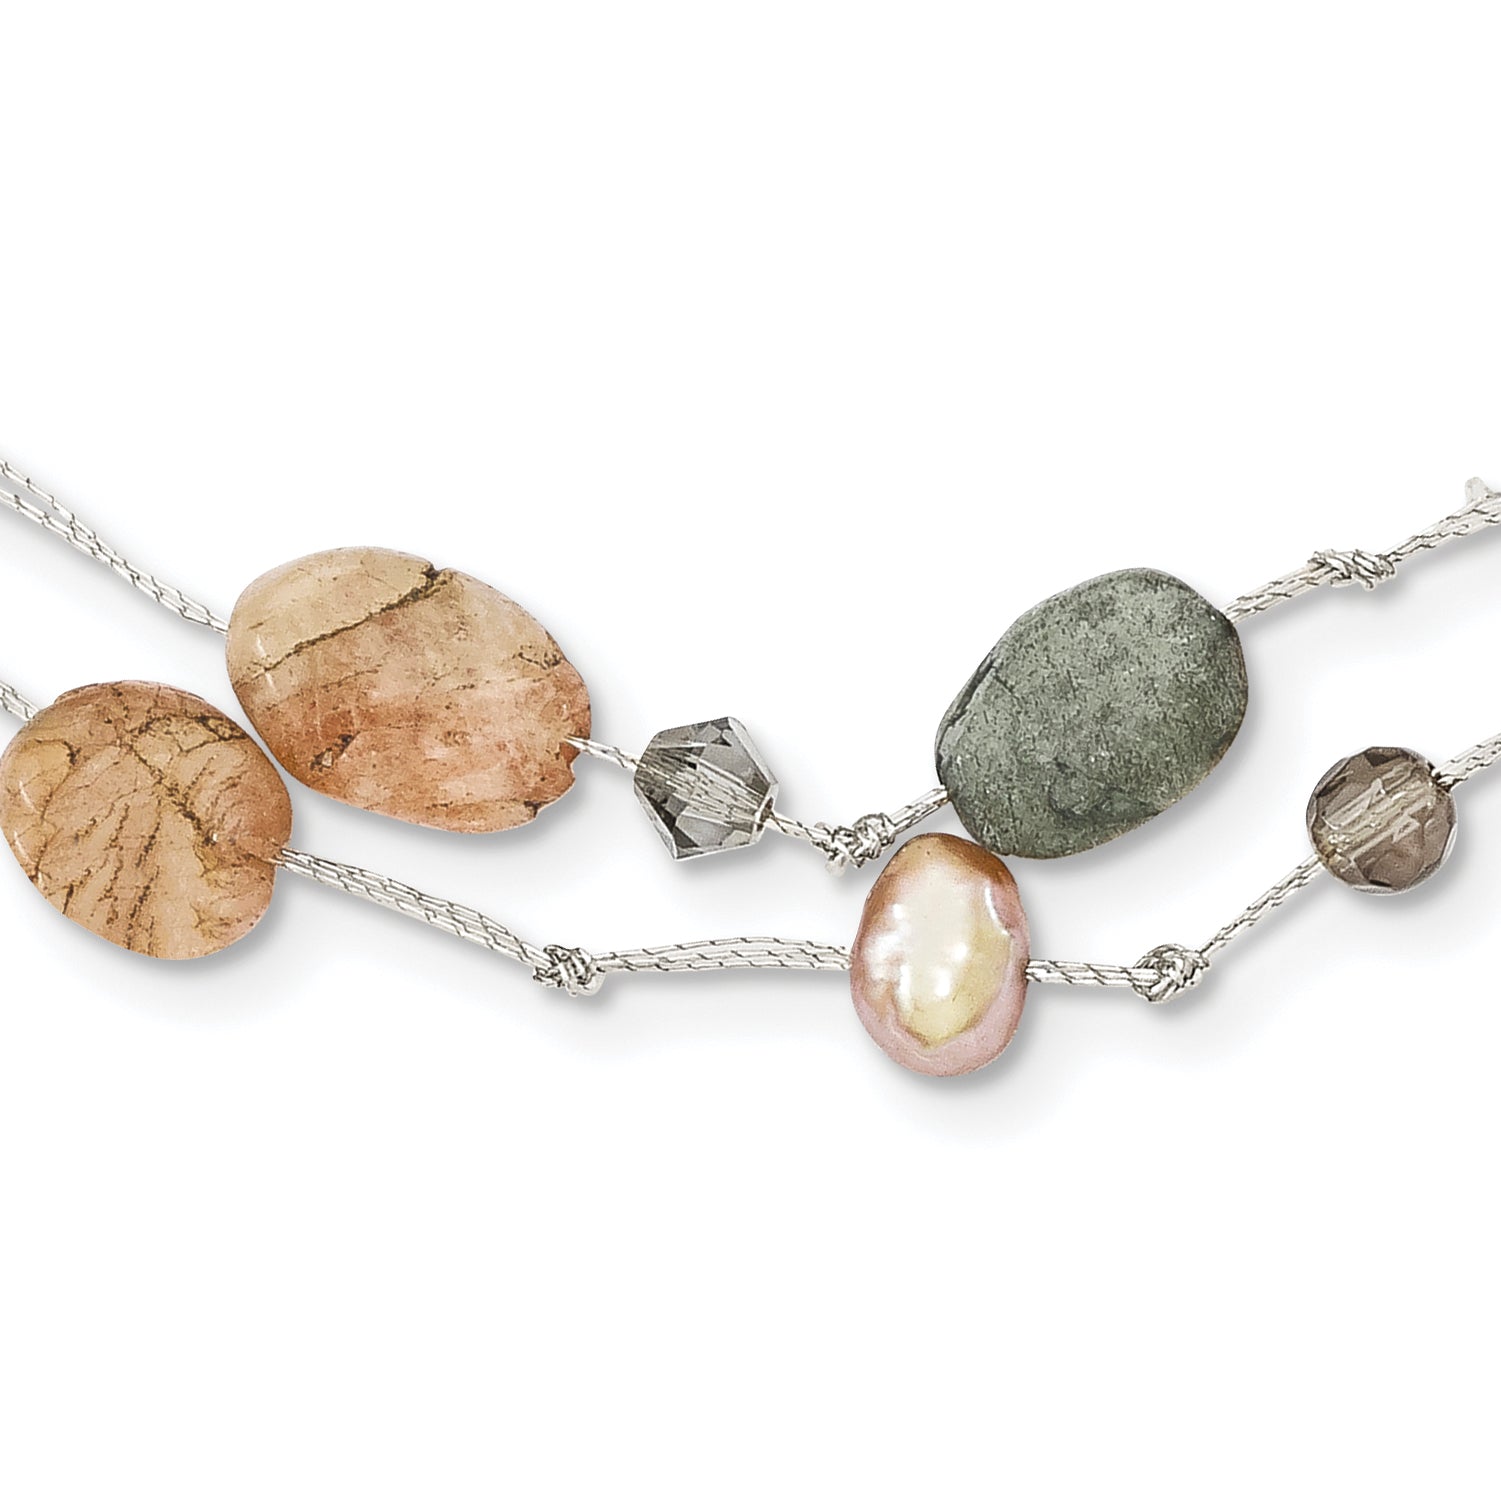 Labradorite/Red Moonstone/FW Cultured Pearl/Crystal Necklace